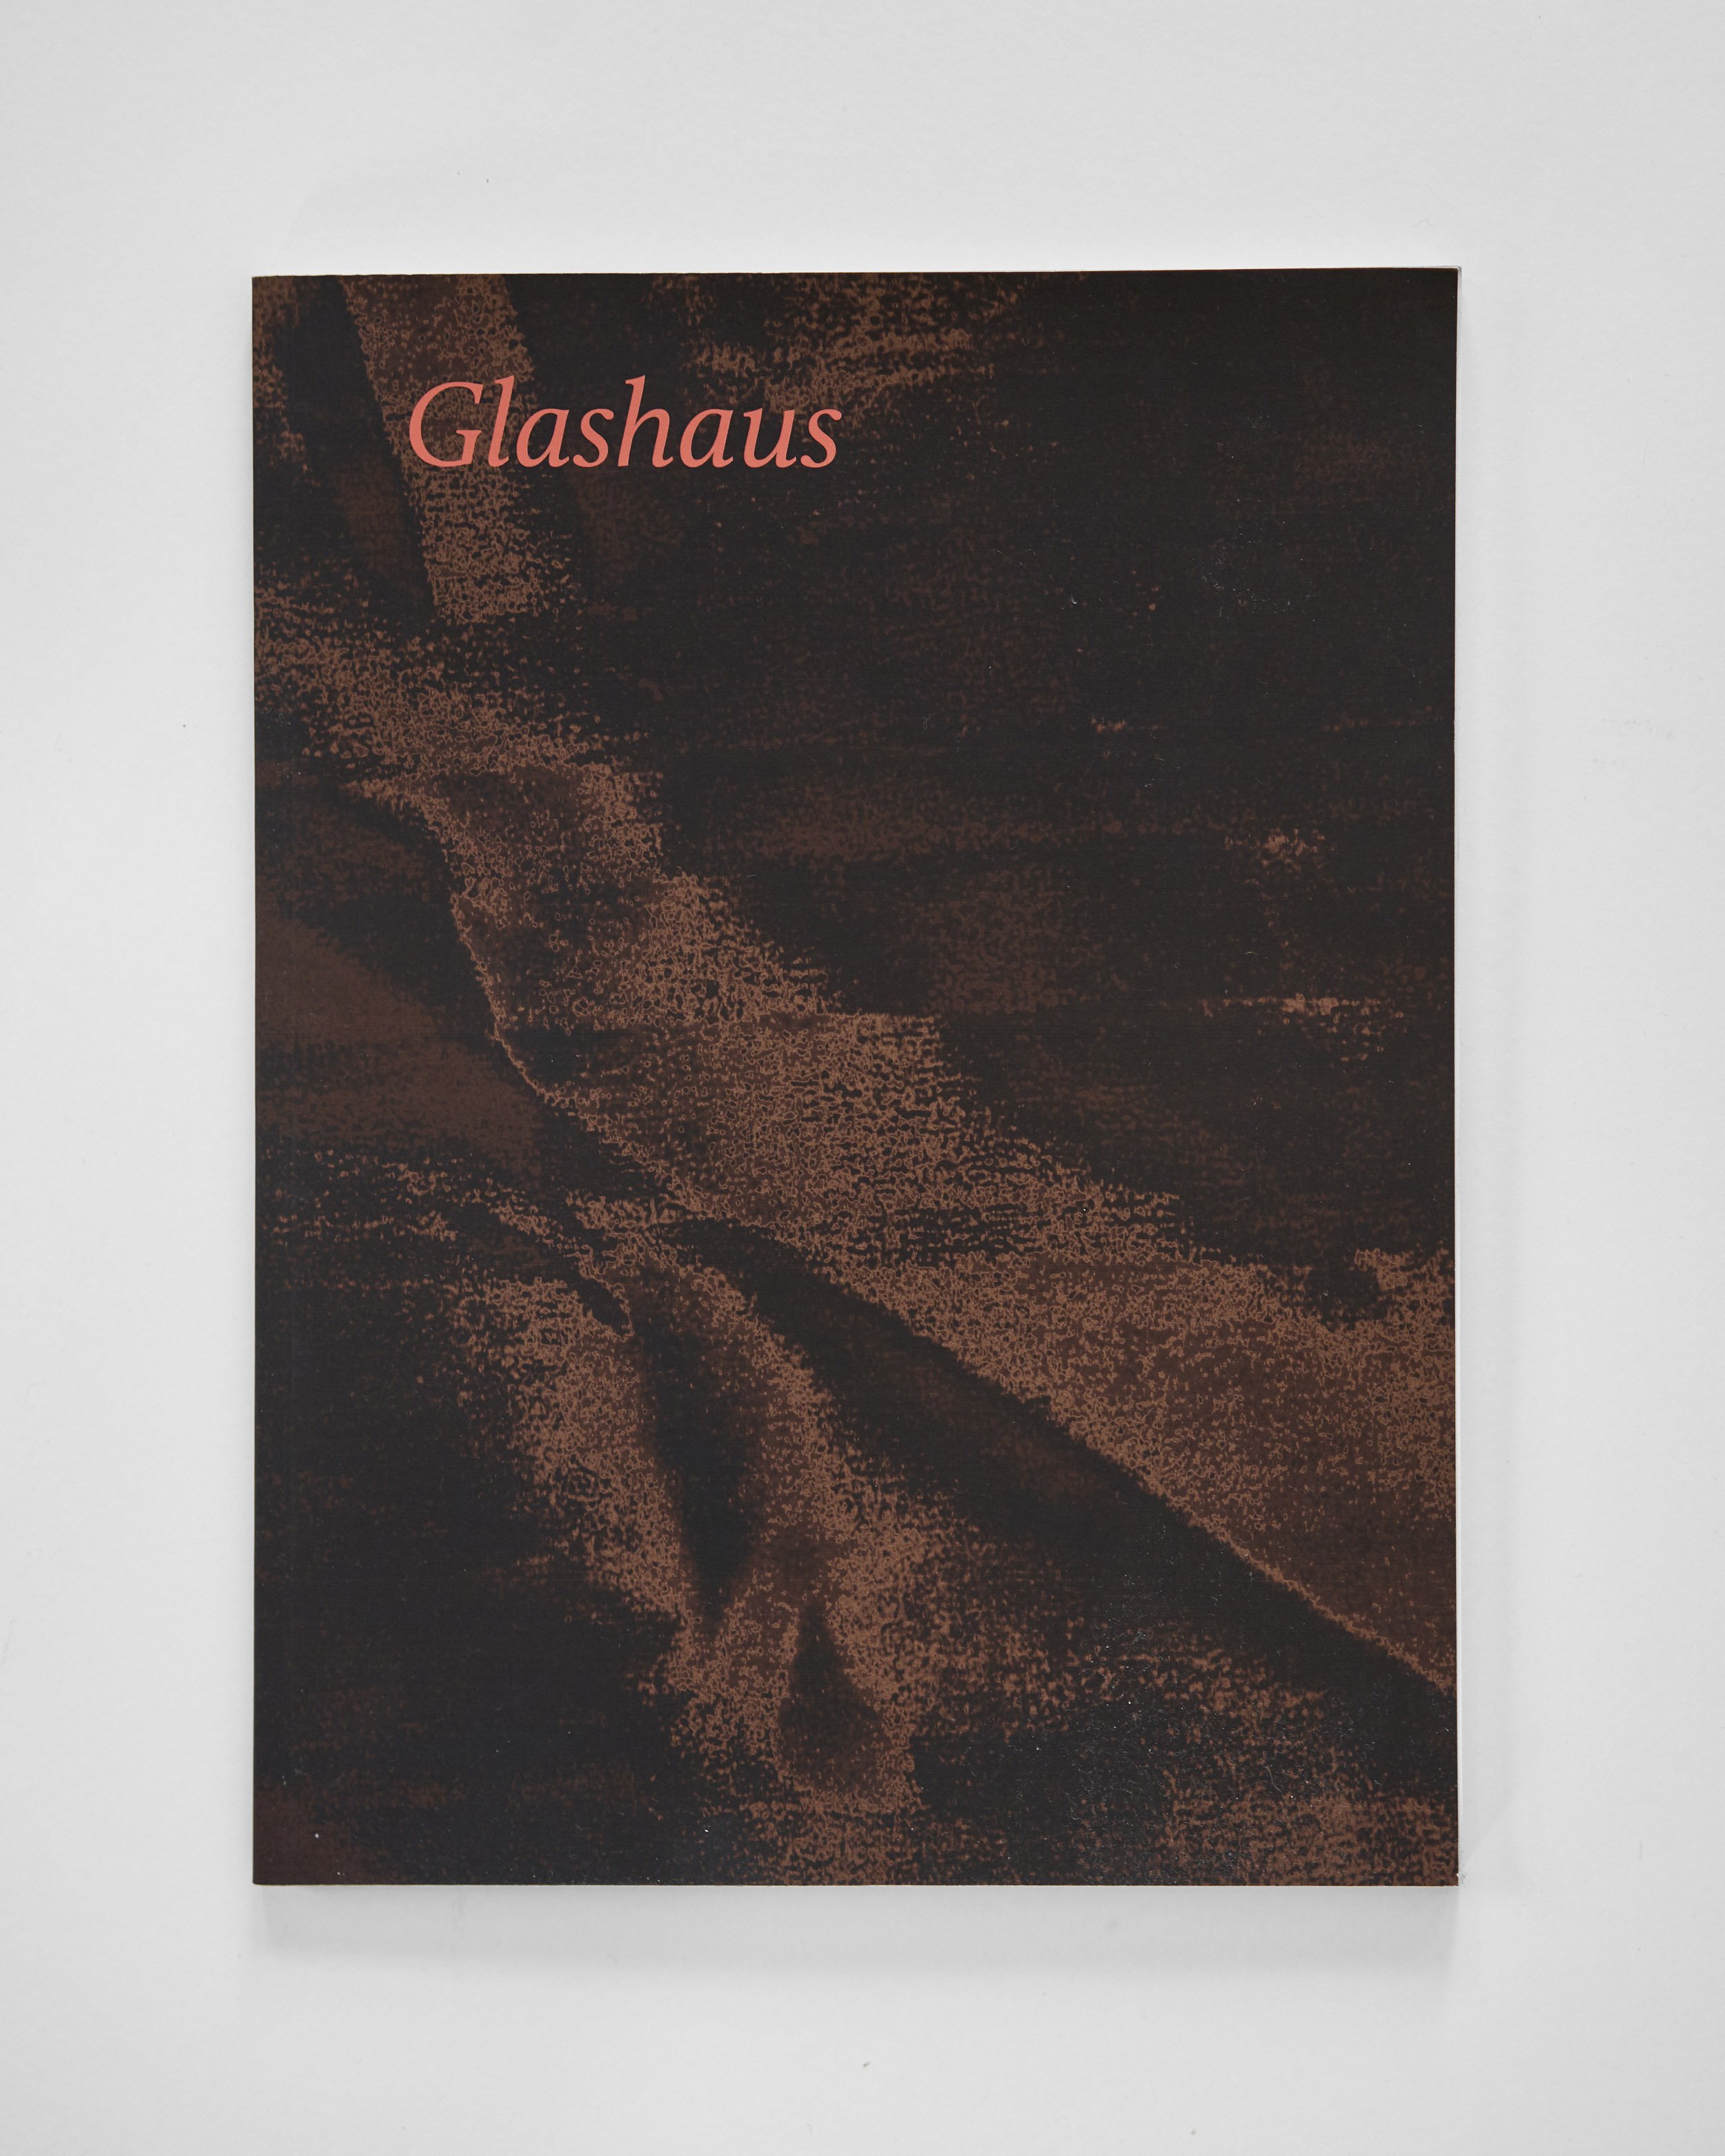   Glashaus  (2020)  Published on occasion of the exhibition Glashaus (joint with Alexandra Gschiel, Schaumbad Freies Atelierhaus Graz, 2019).  isbn: 978-1-8382825-0-9 